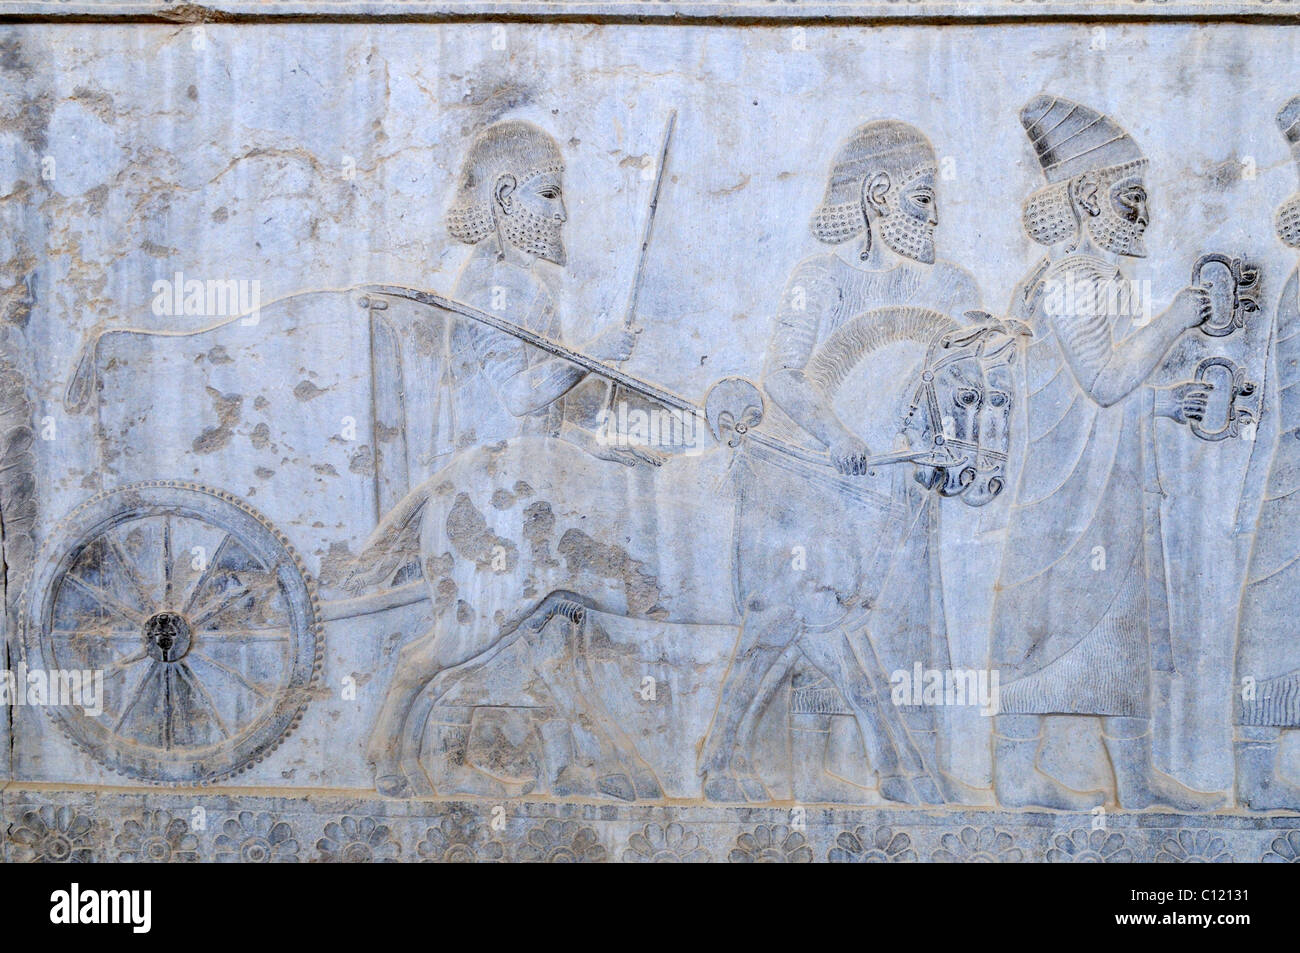 Famous bas-relief with chariot on the Apadana Palace, Achaemenid archeological site of Persepolis, UNESCO World Heritage Site Stock Photo